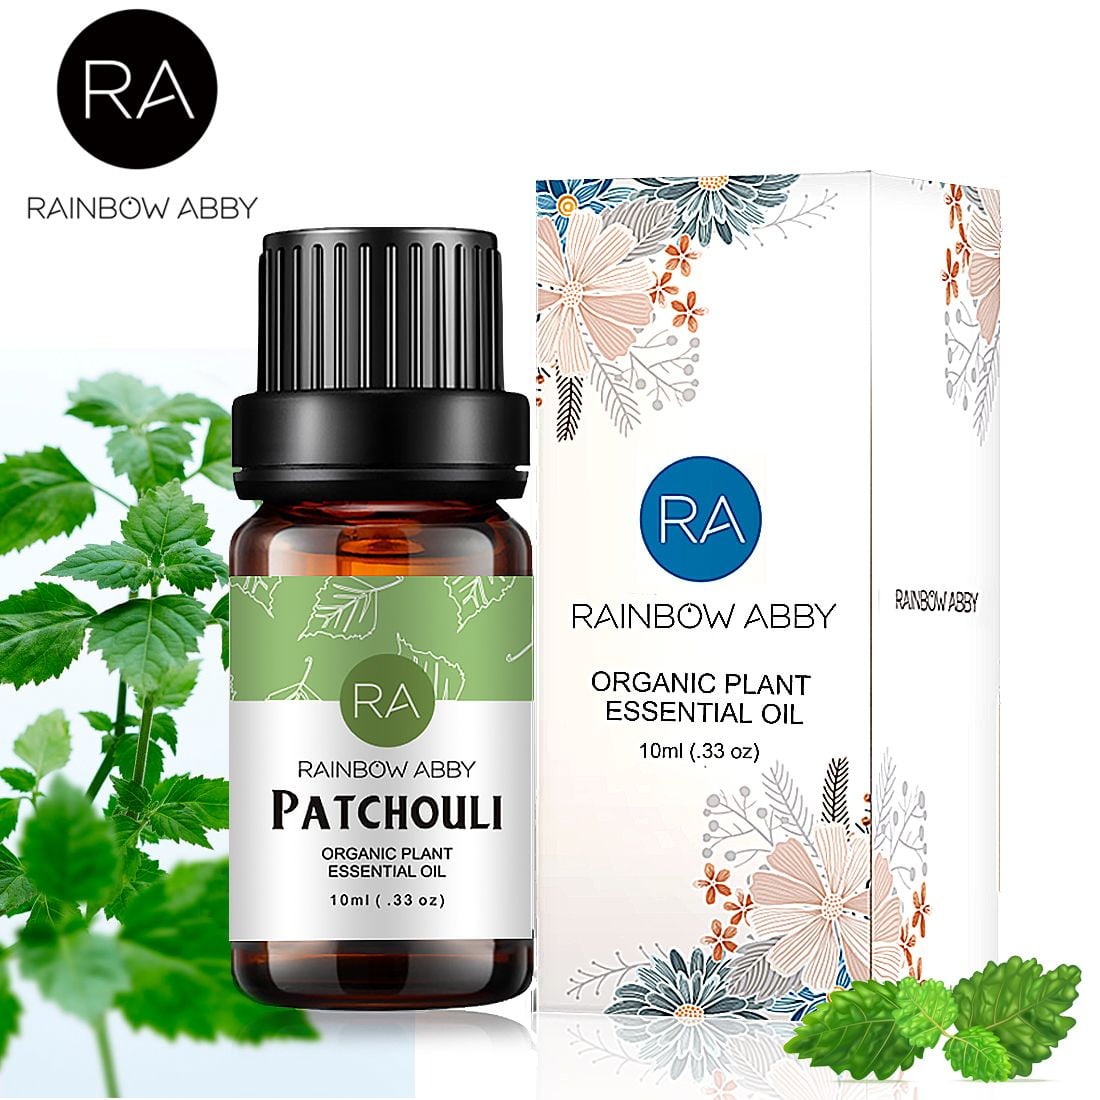 GREENSLEEVES Patchouli Essential Oil 10ml, 100% Pure Organic Patchouli Aromatherapy  Diffuser Oils 10ml